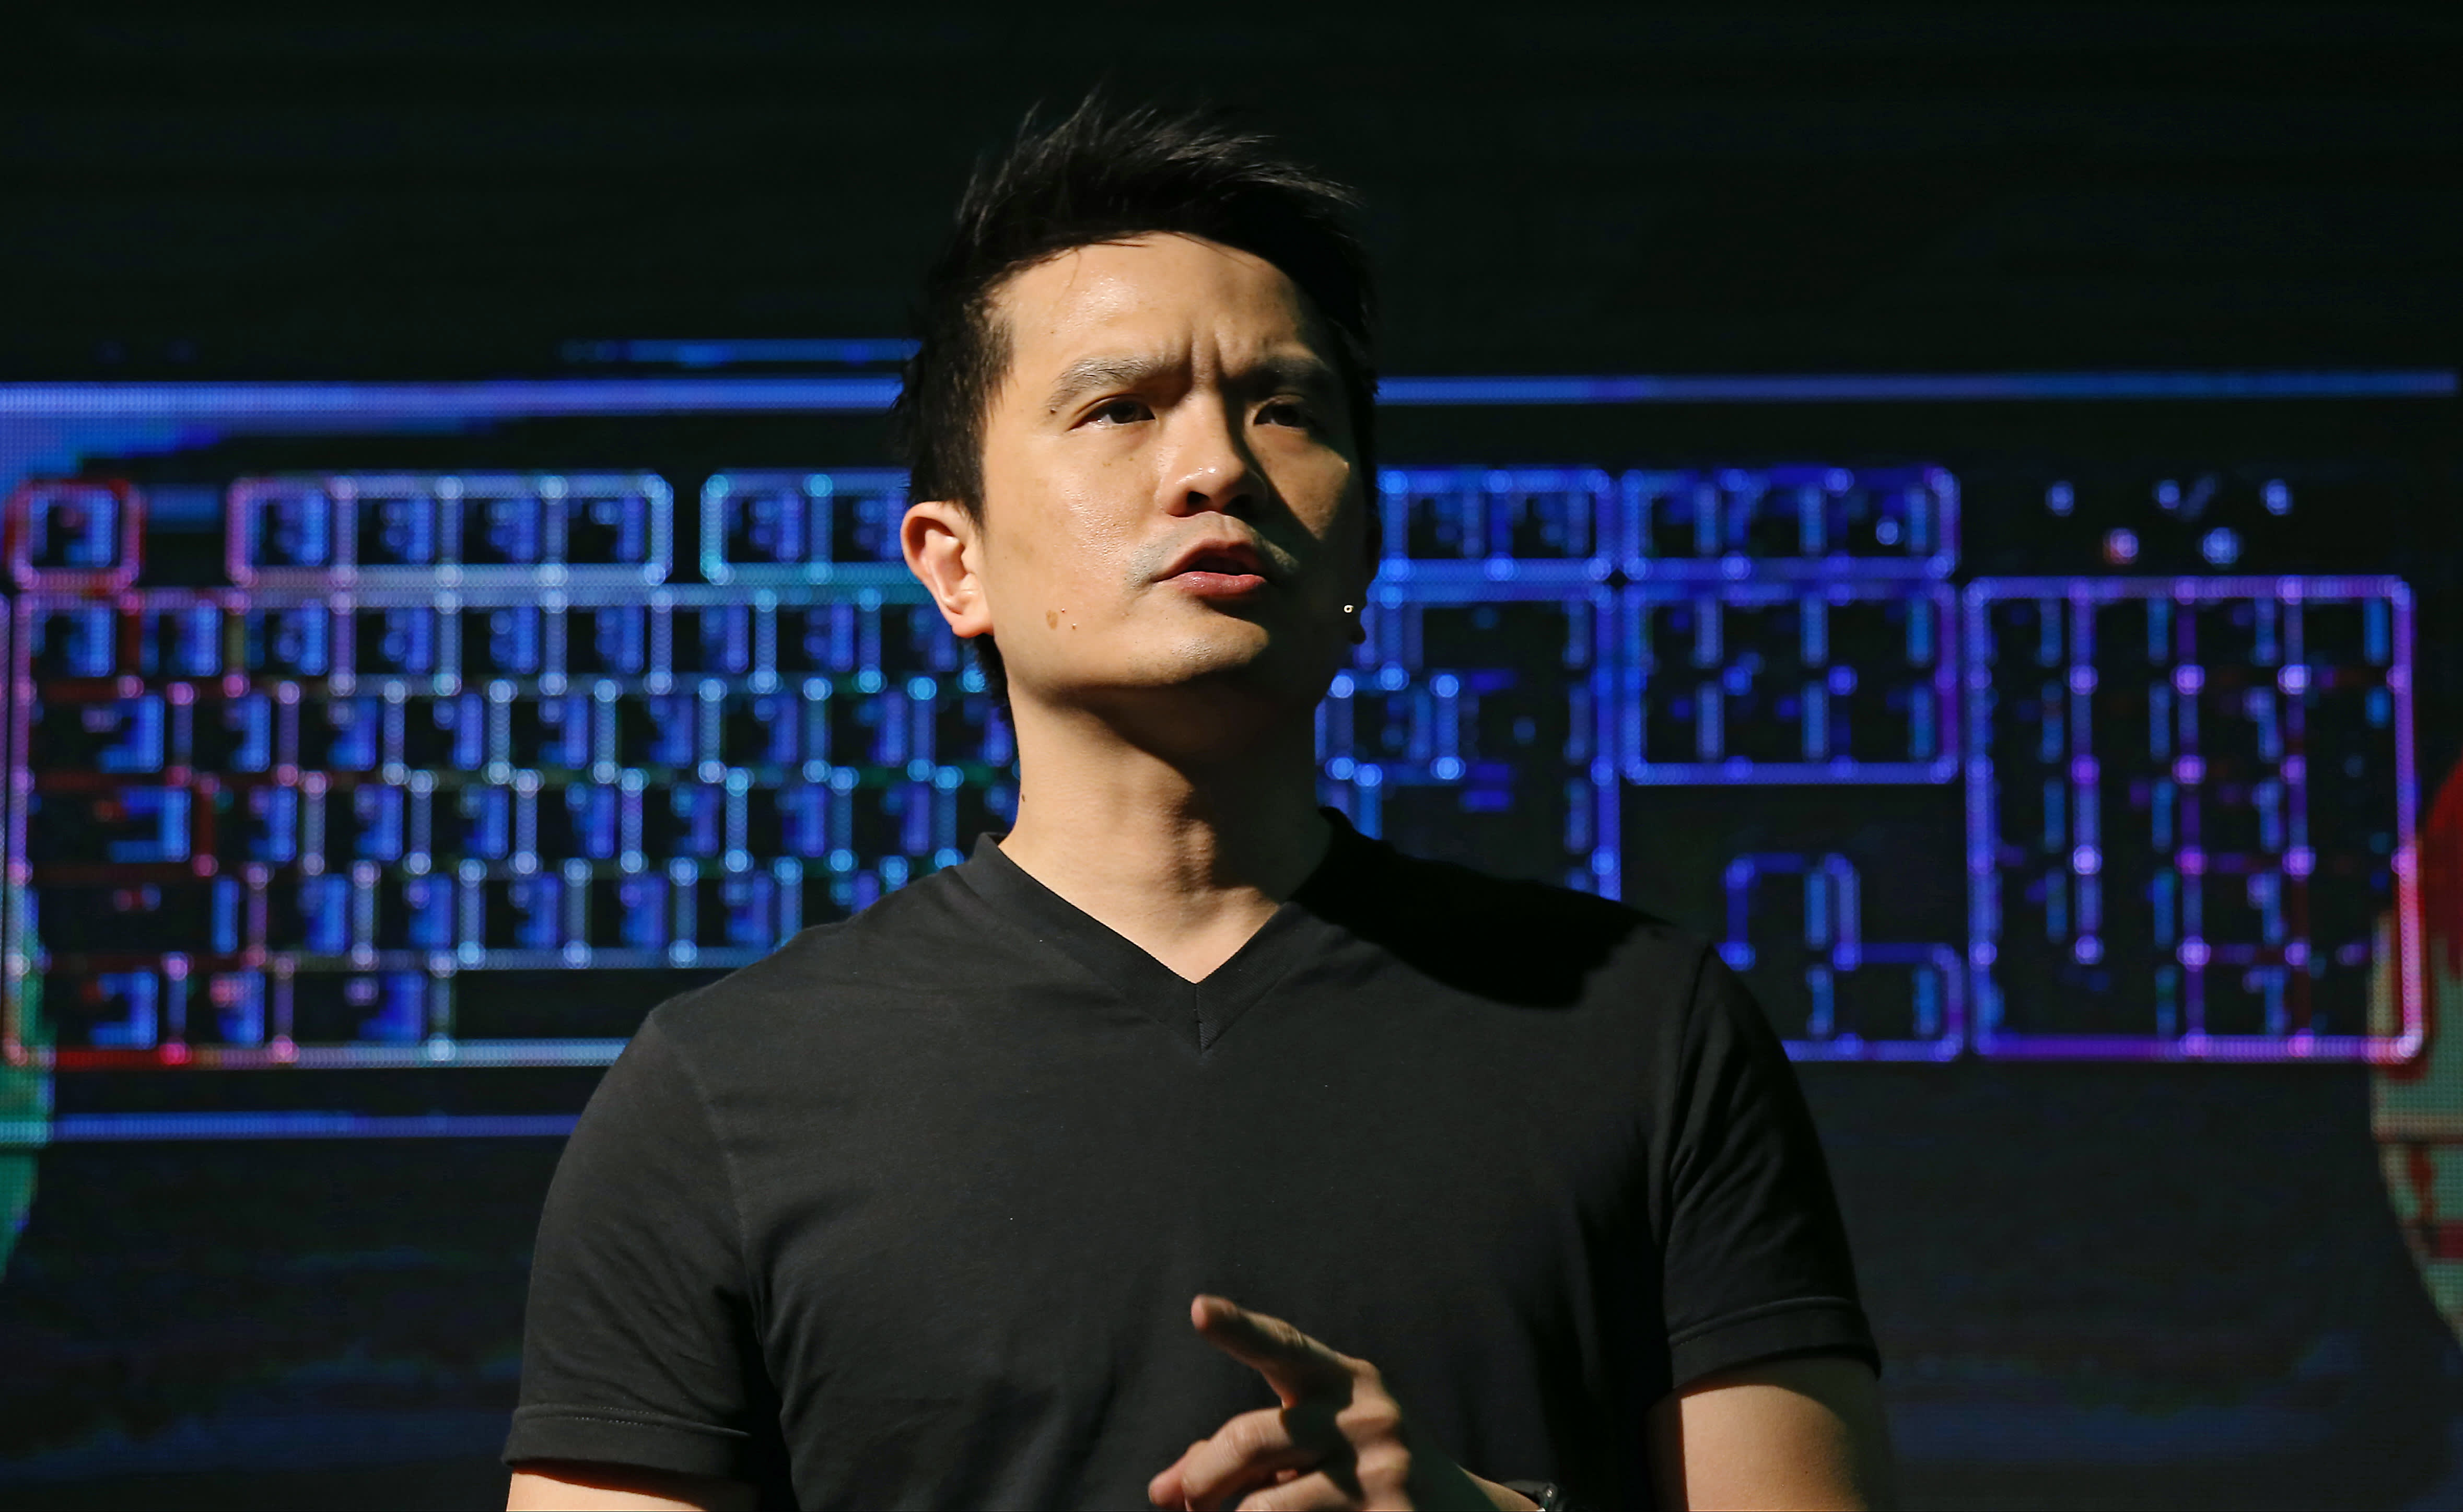 Razer shares fall nearly 8% after group including co-founder offers to take company private